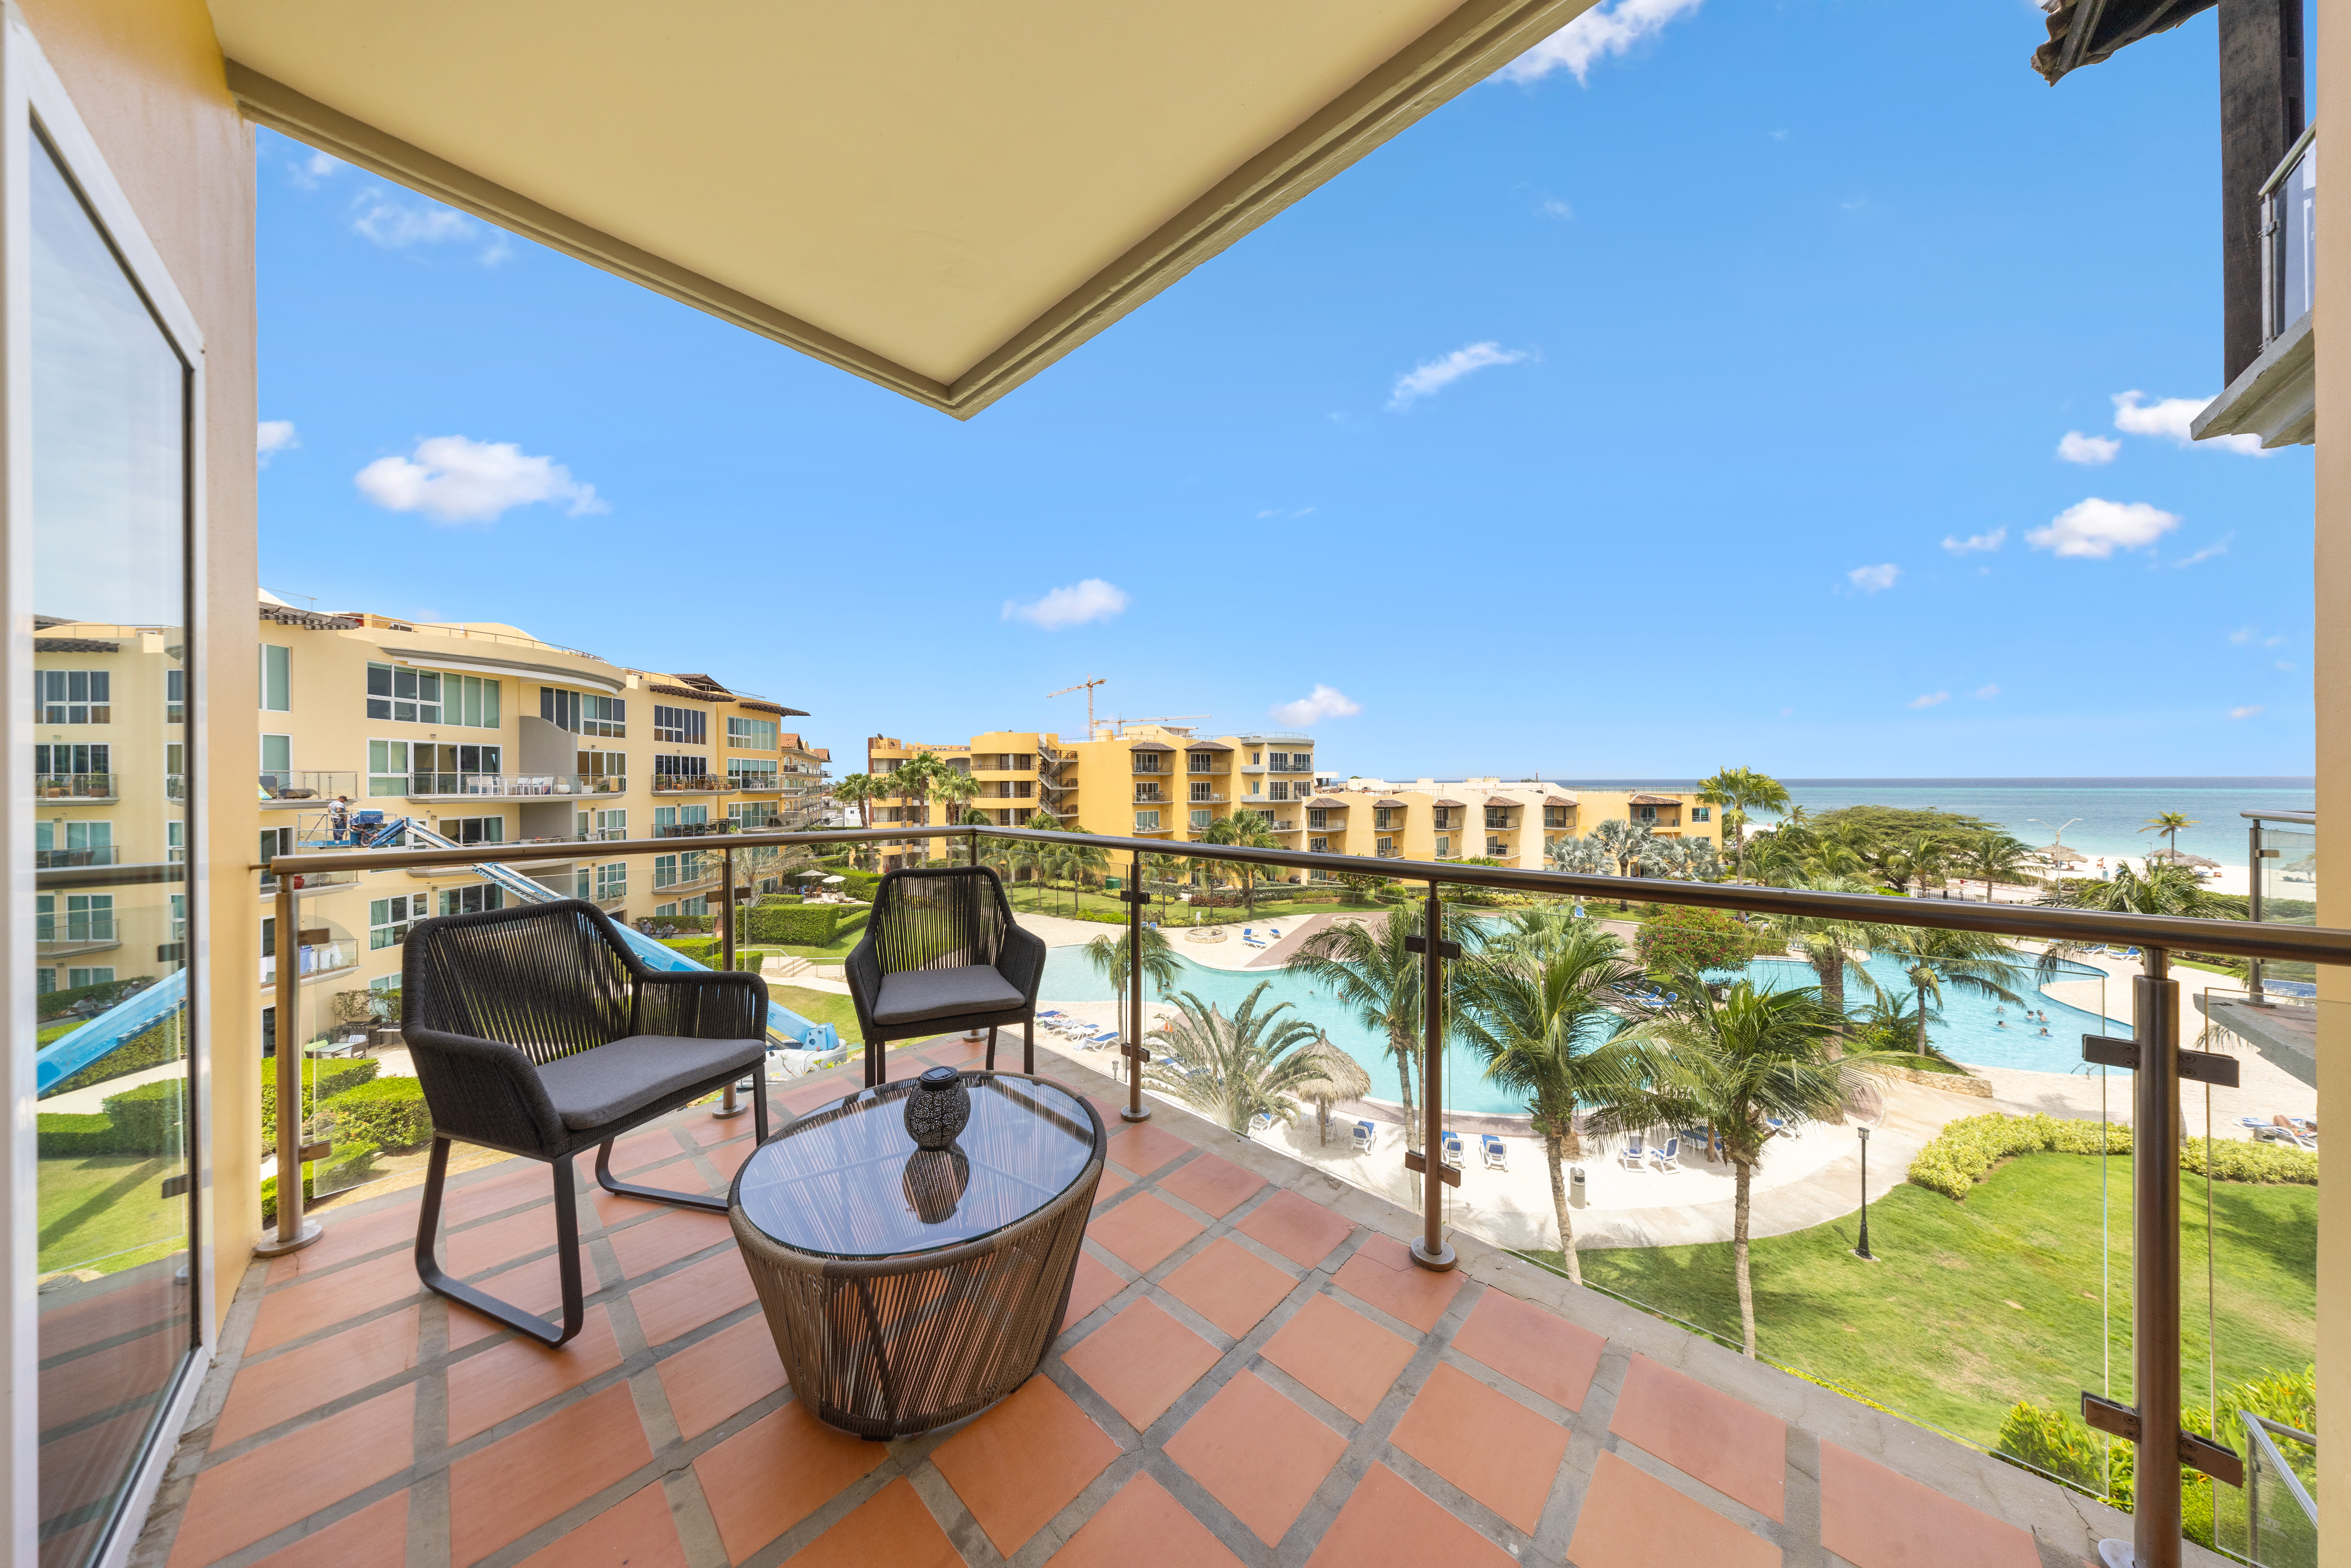 Opulent Balcony of the condo in Aruba with ocean views - Scenic private balcony for relaxation